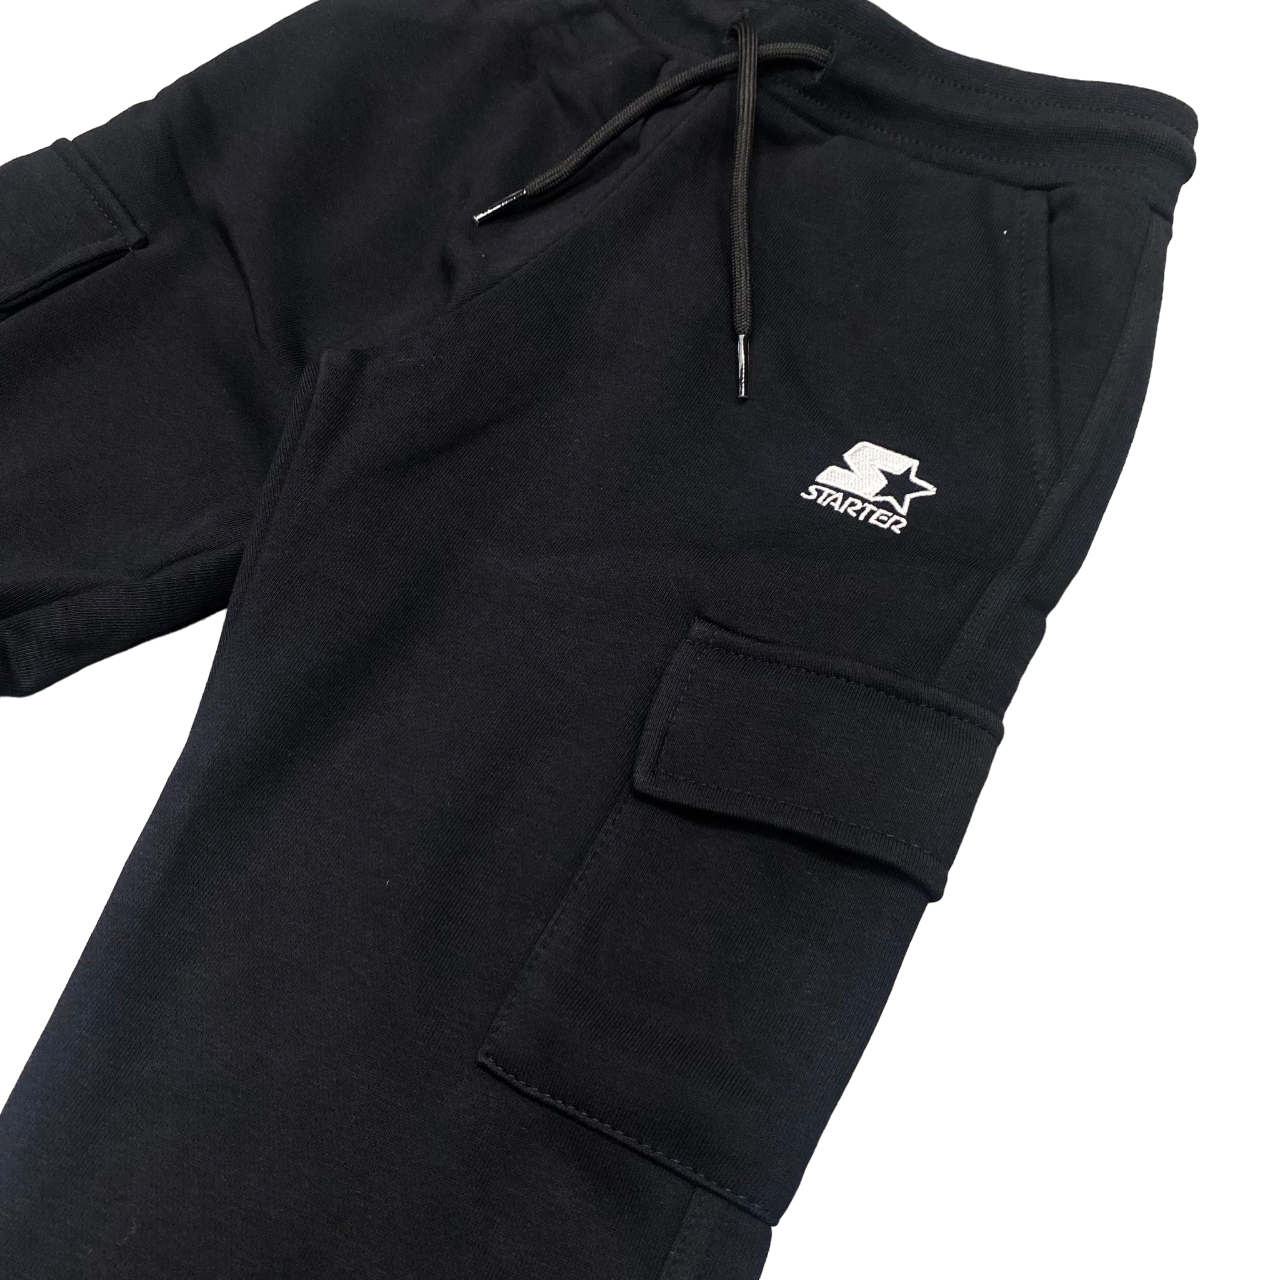 Starter sports trousers with big pockets for boys. Black colour